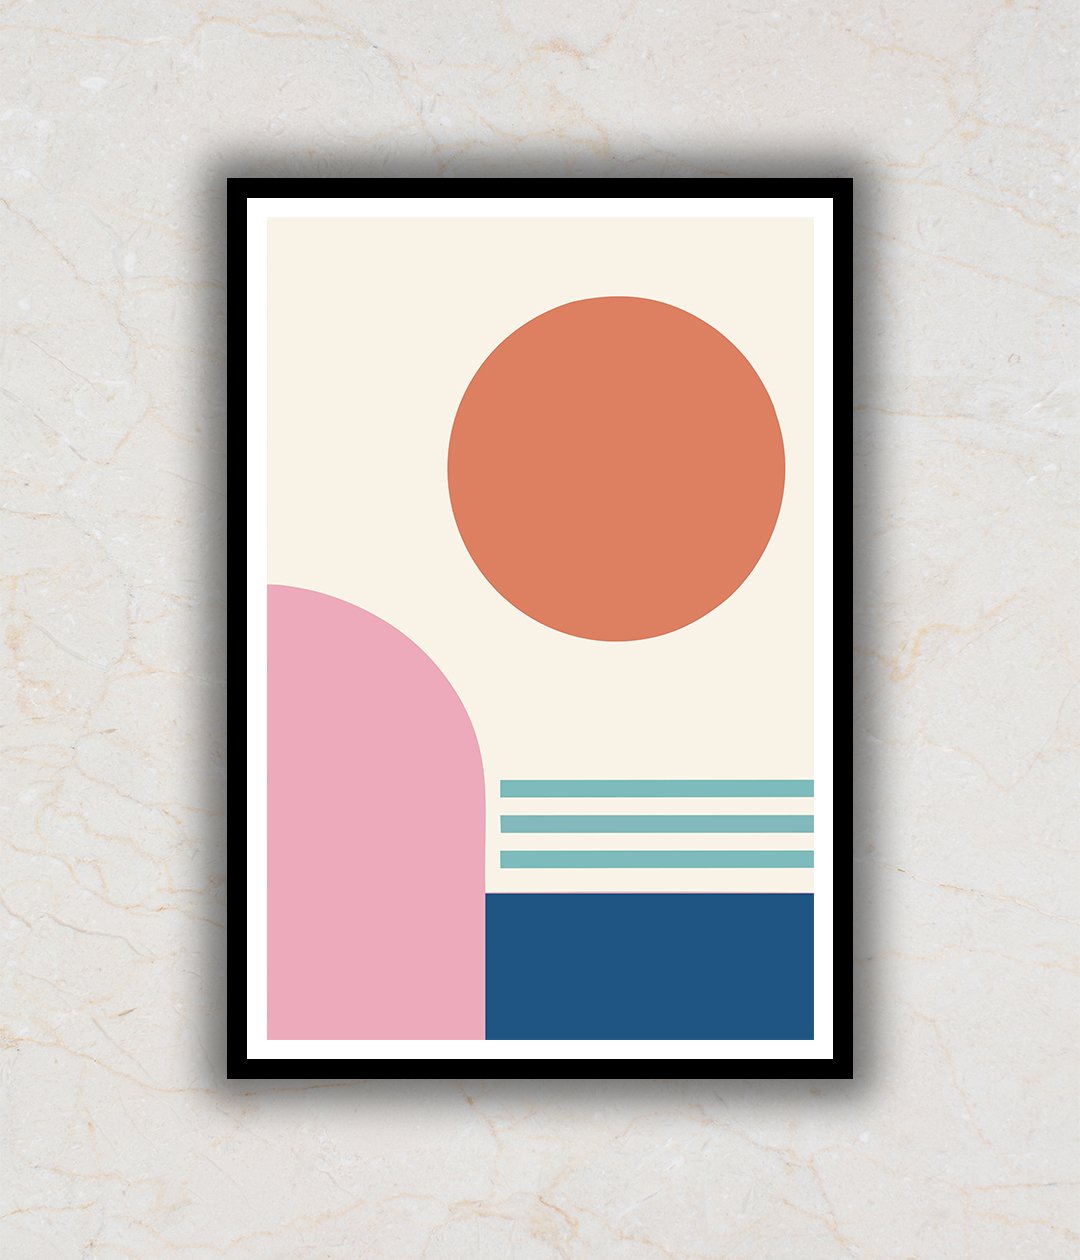 The Apricot Sun Abstract Painting